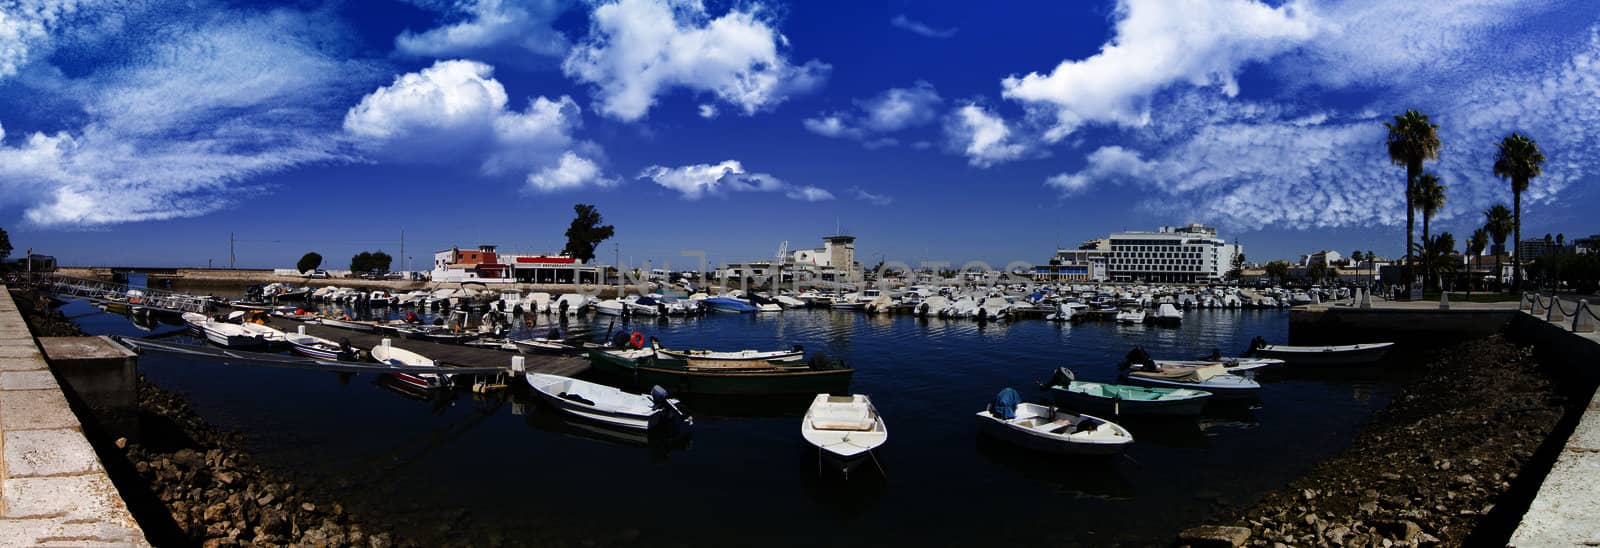 View of a marina in the city with many recreational boats.